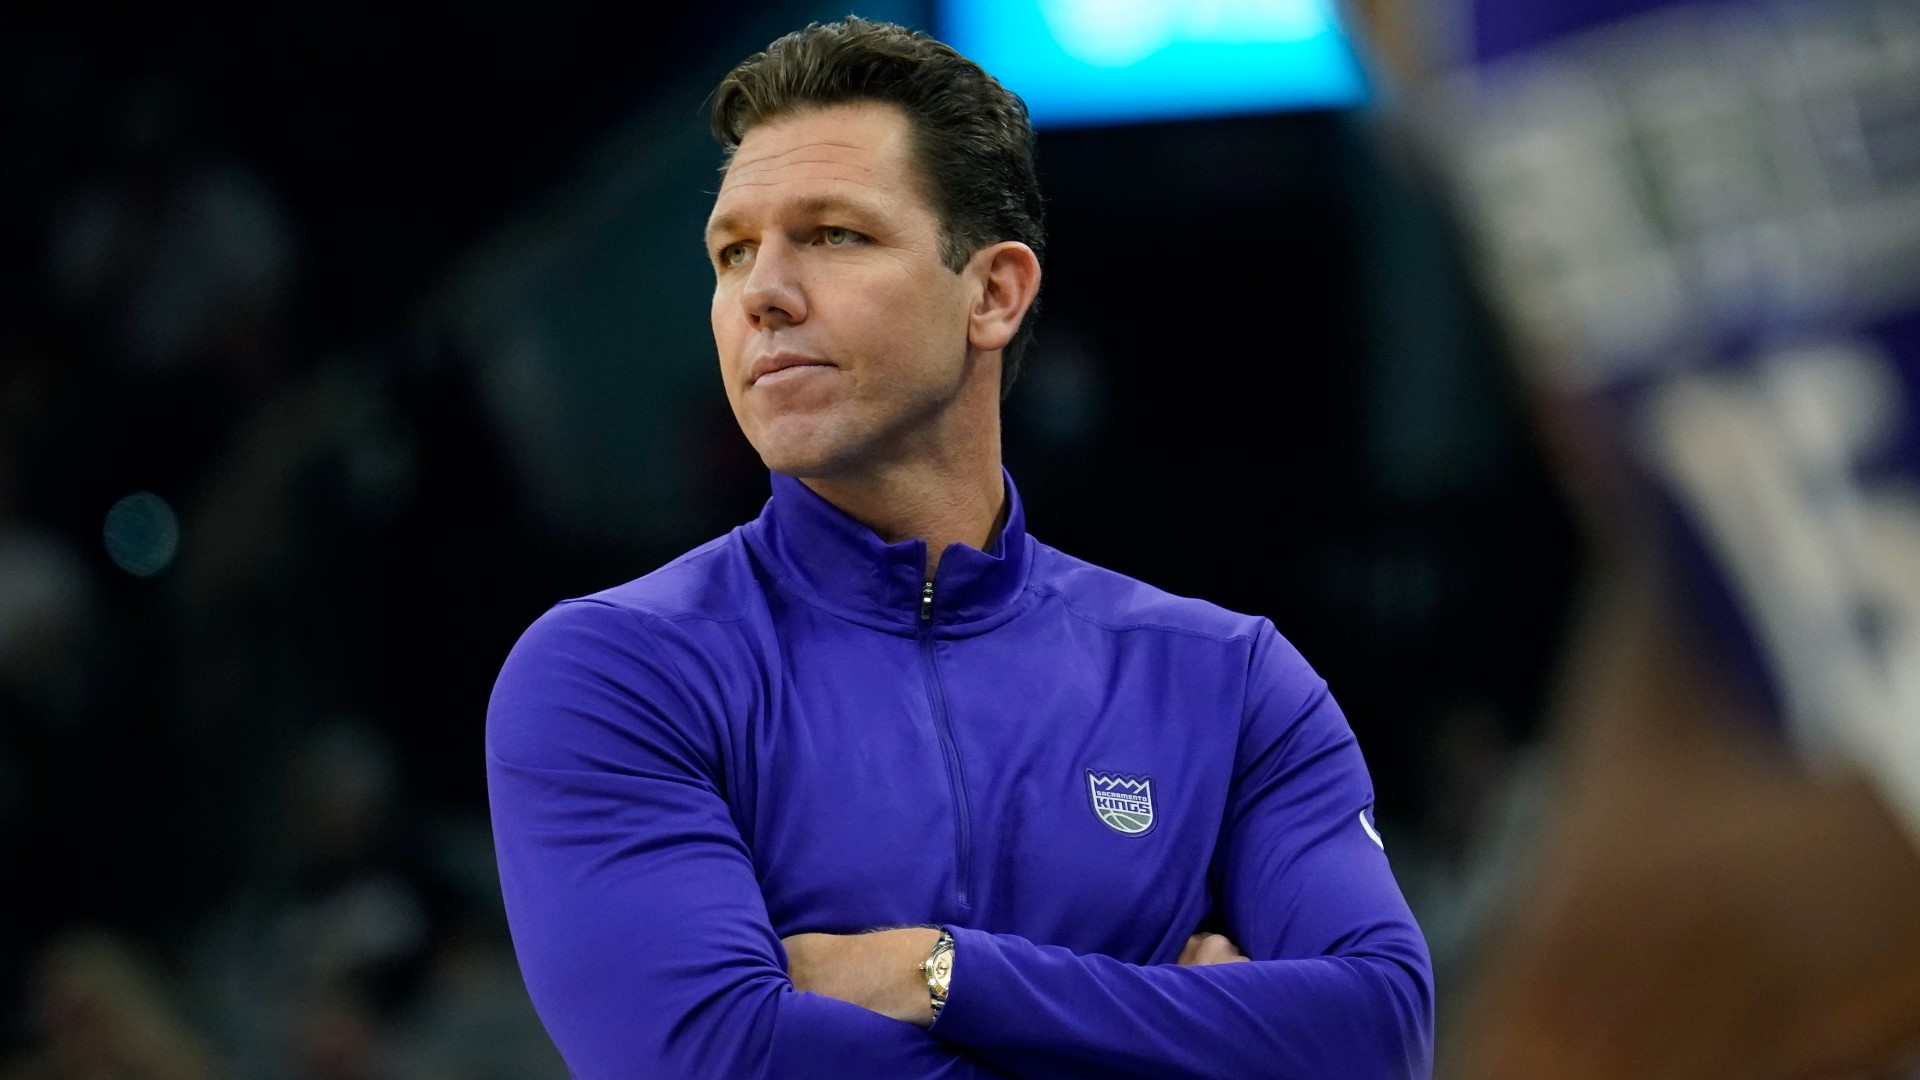 Luke Walton is out as head coach for the Sacramento Kings. Monte McNair speaks to the press after the firing.